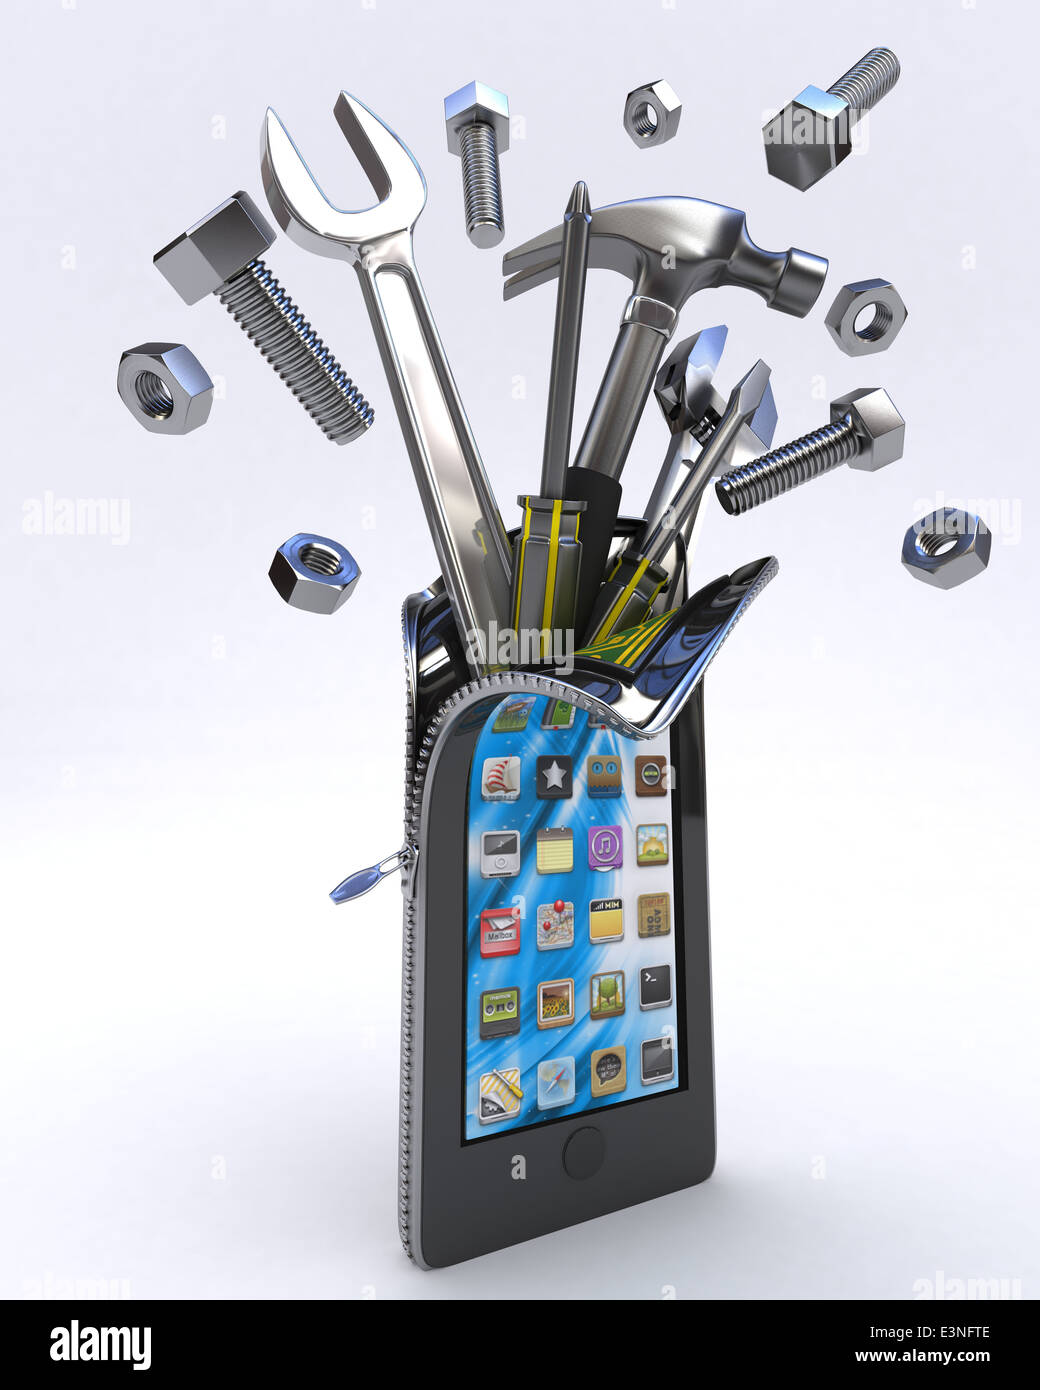 3D Render of a Mobile Phone Tools Stock Photo